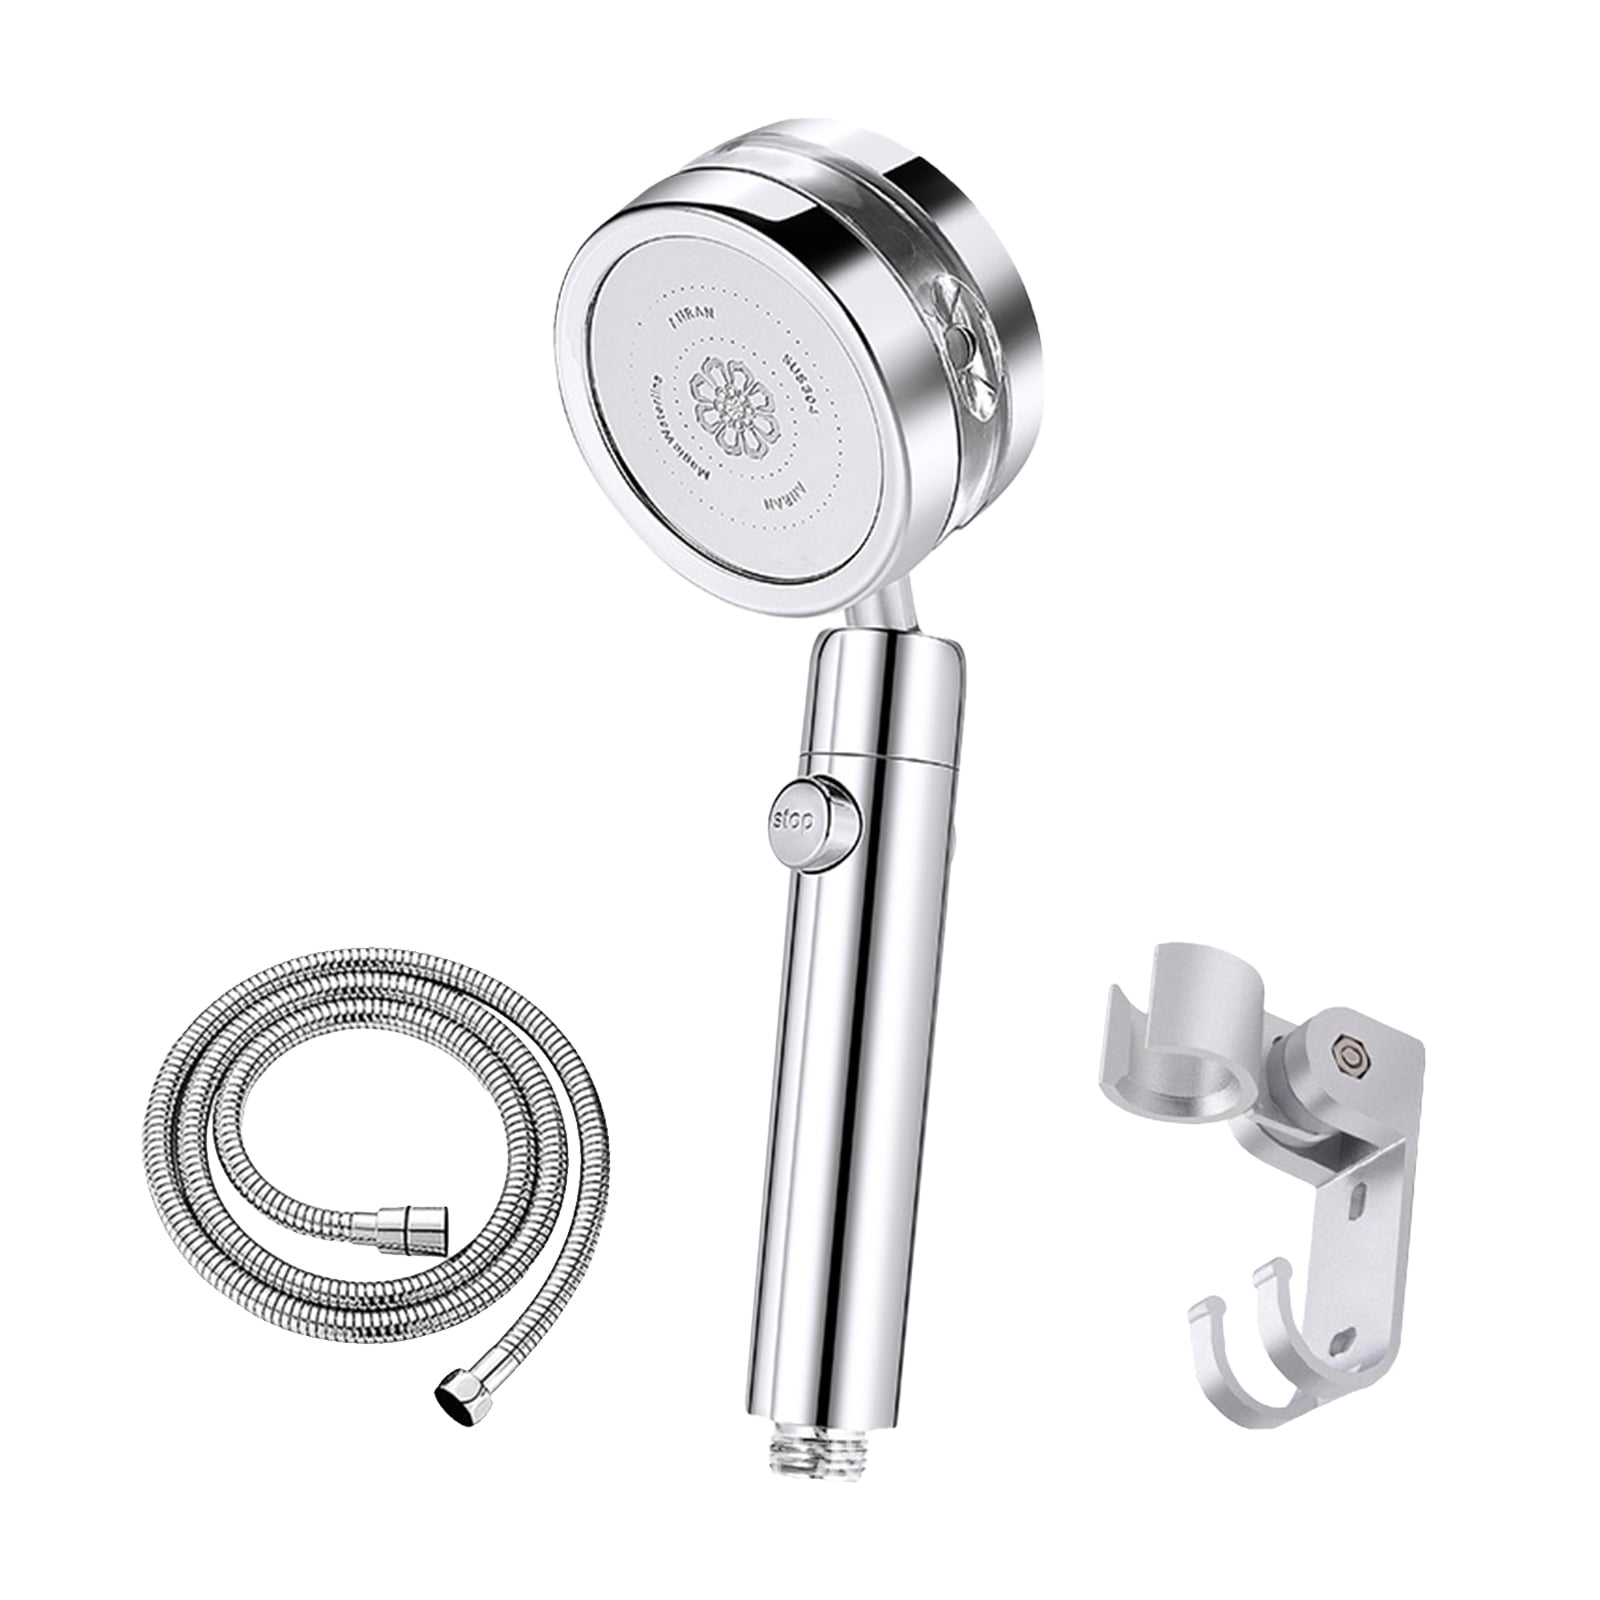 1.5M Home Stainless Steel Chrome High Pressure Shower Head and Hose Bathroom